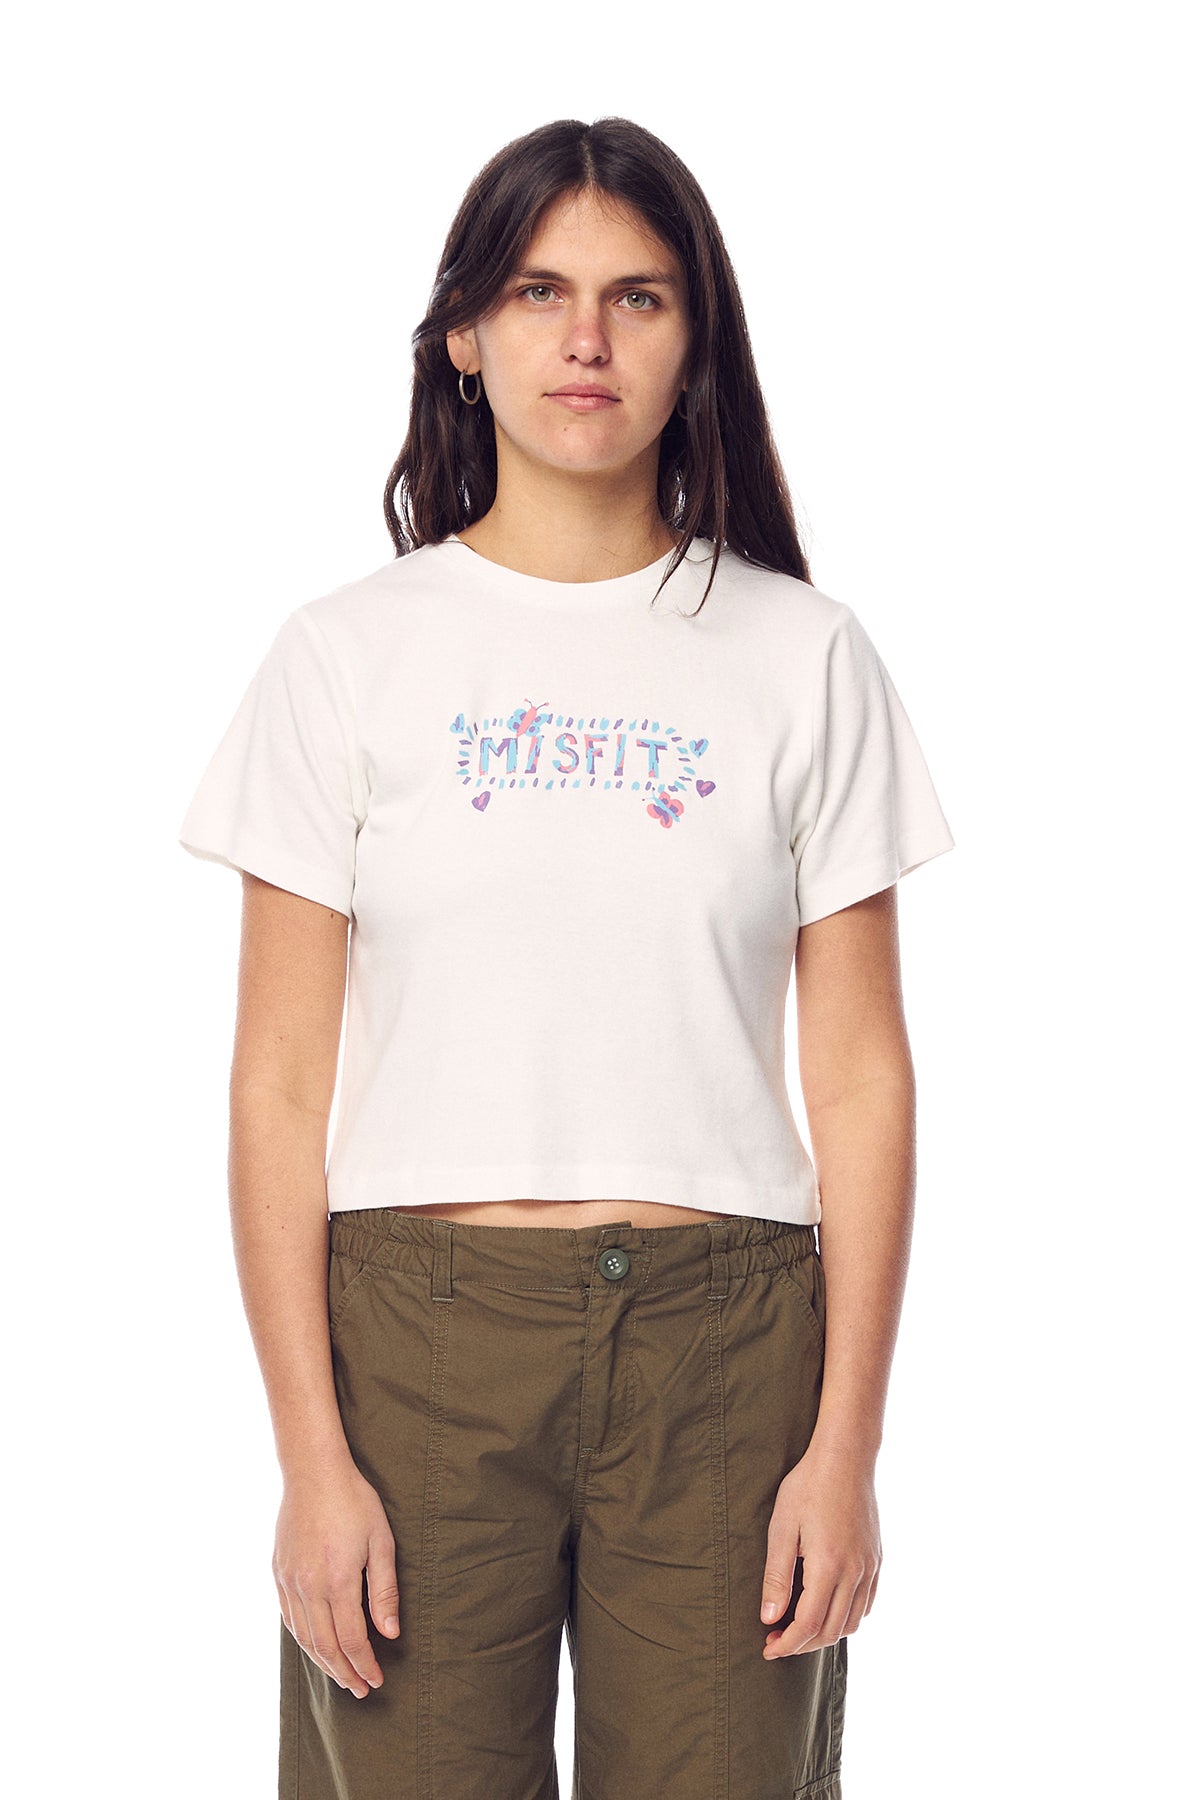 FRIENDS & STRANGERS BABY TEE - WASHED WHITE